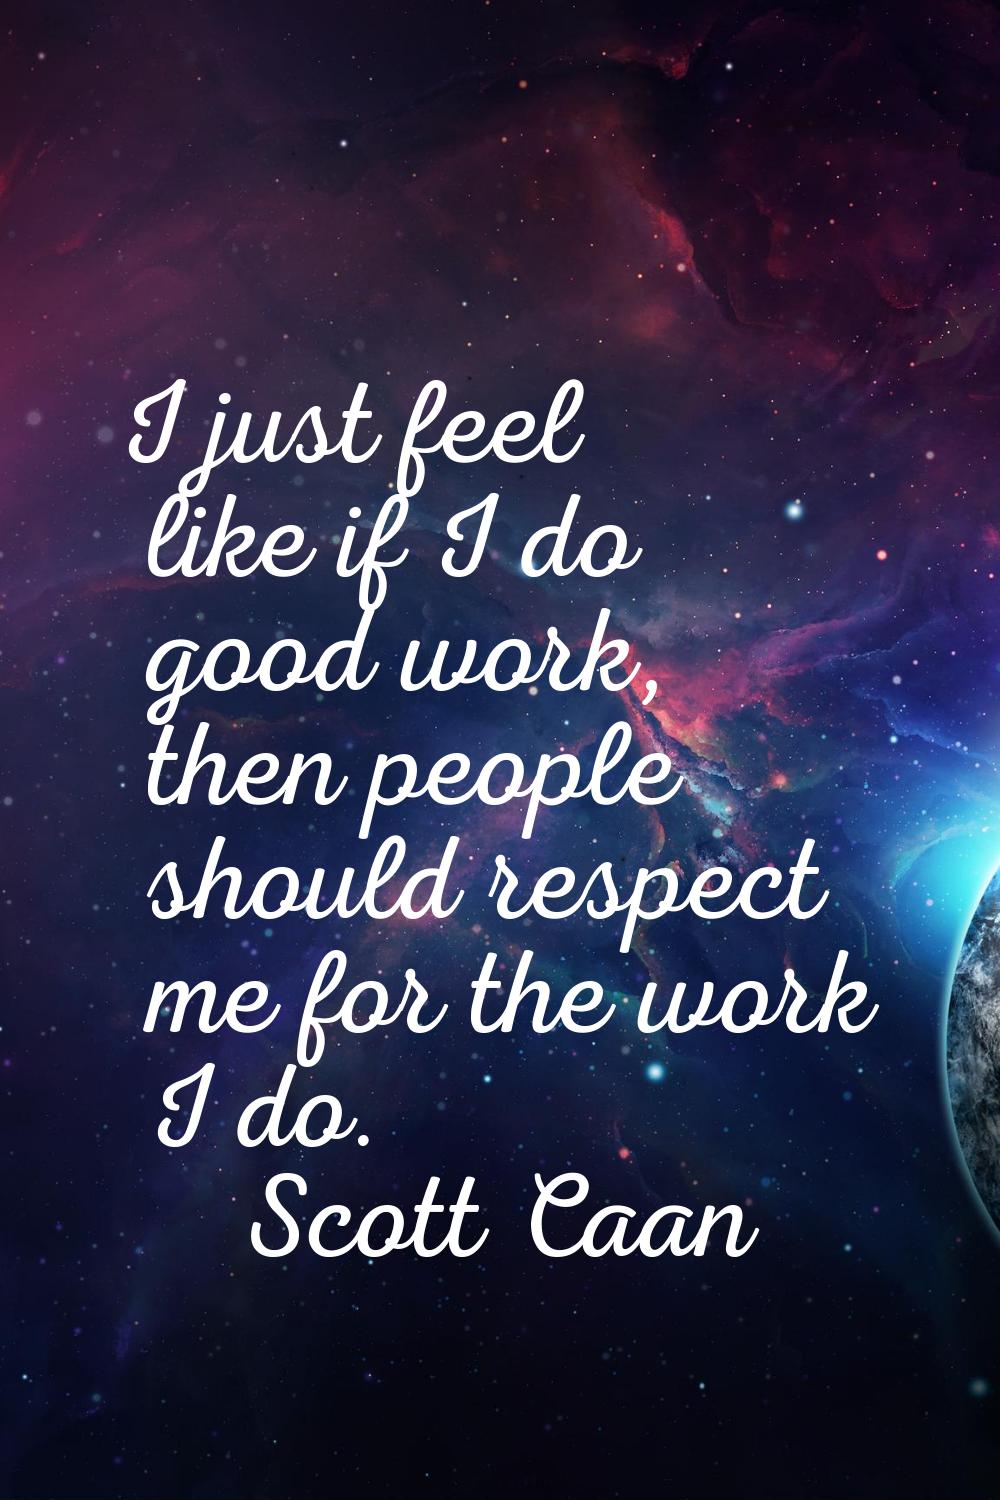 I just feel like if I do good work, then people should respect me for the work I do.